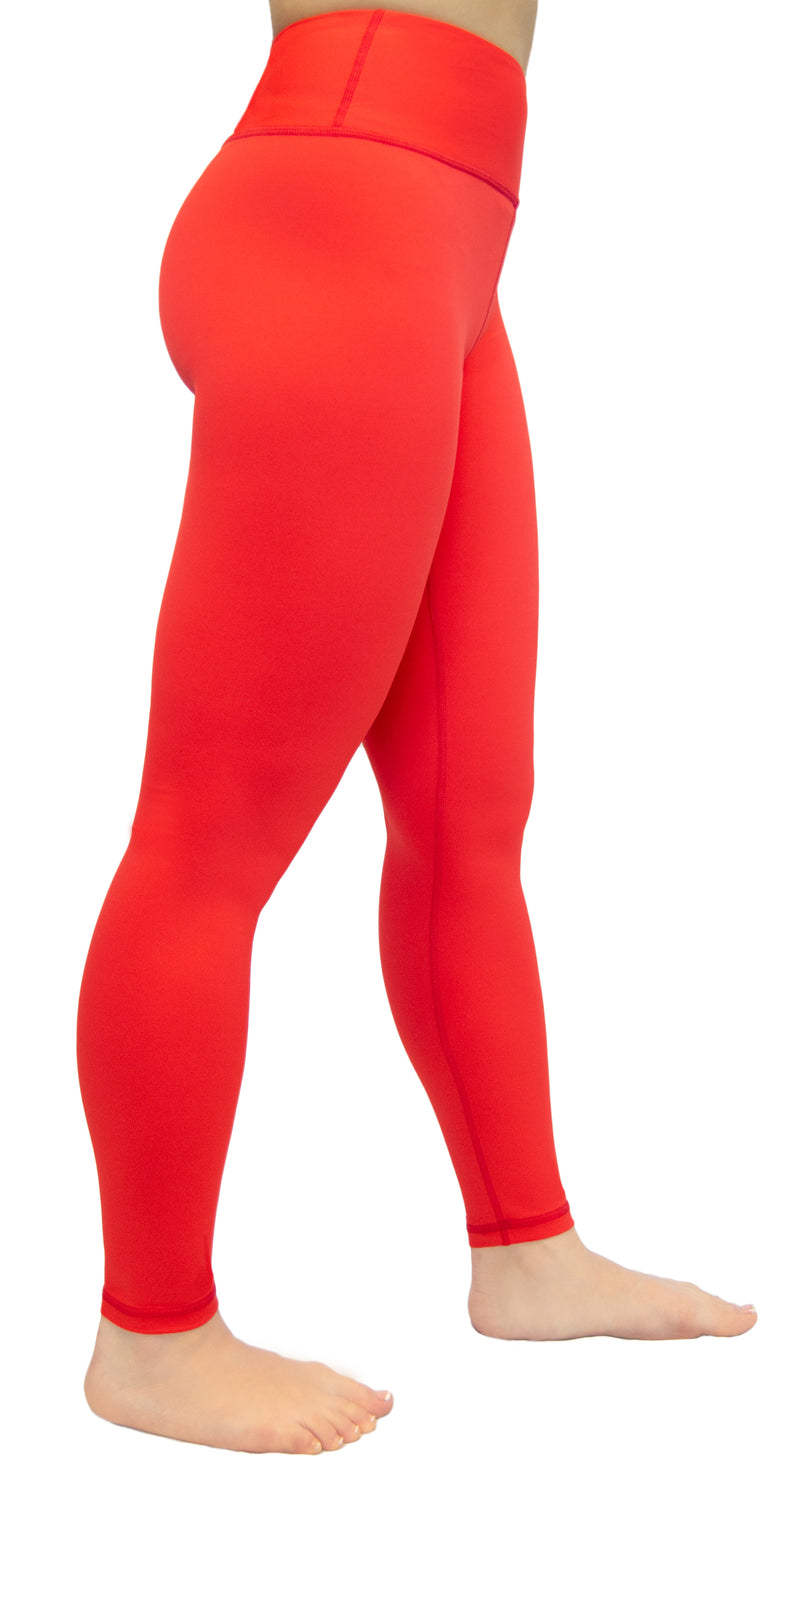 Red Cadillac - Legging [Final Sale]